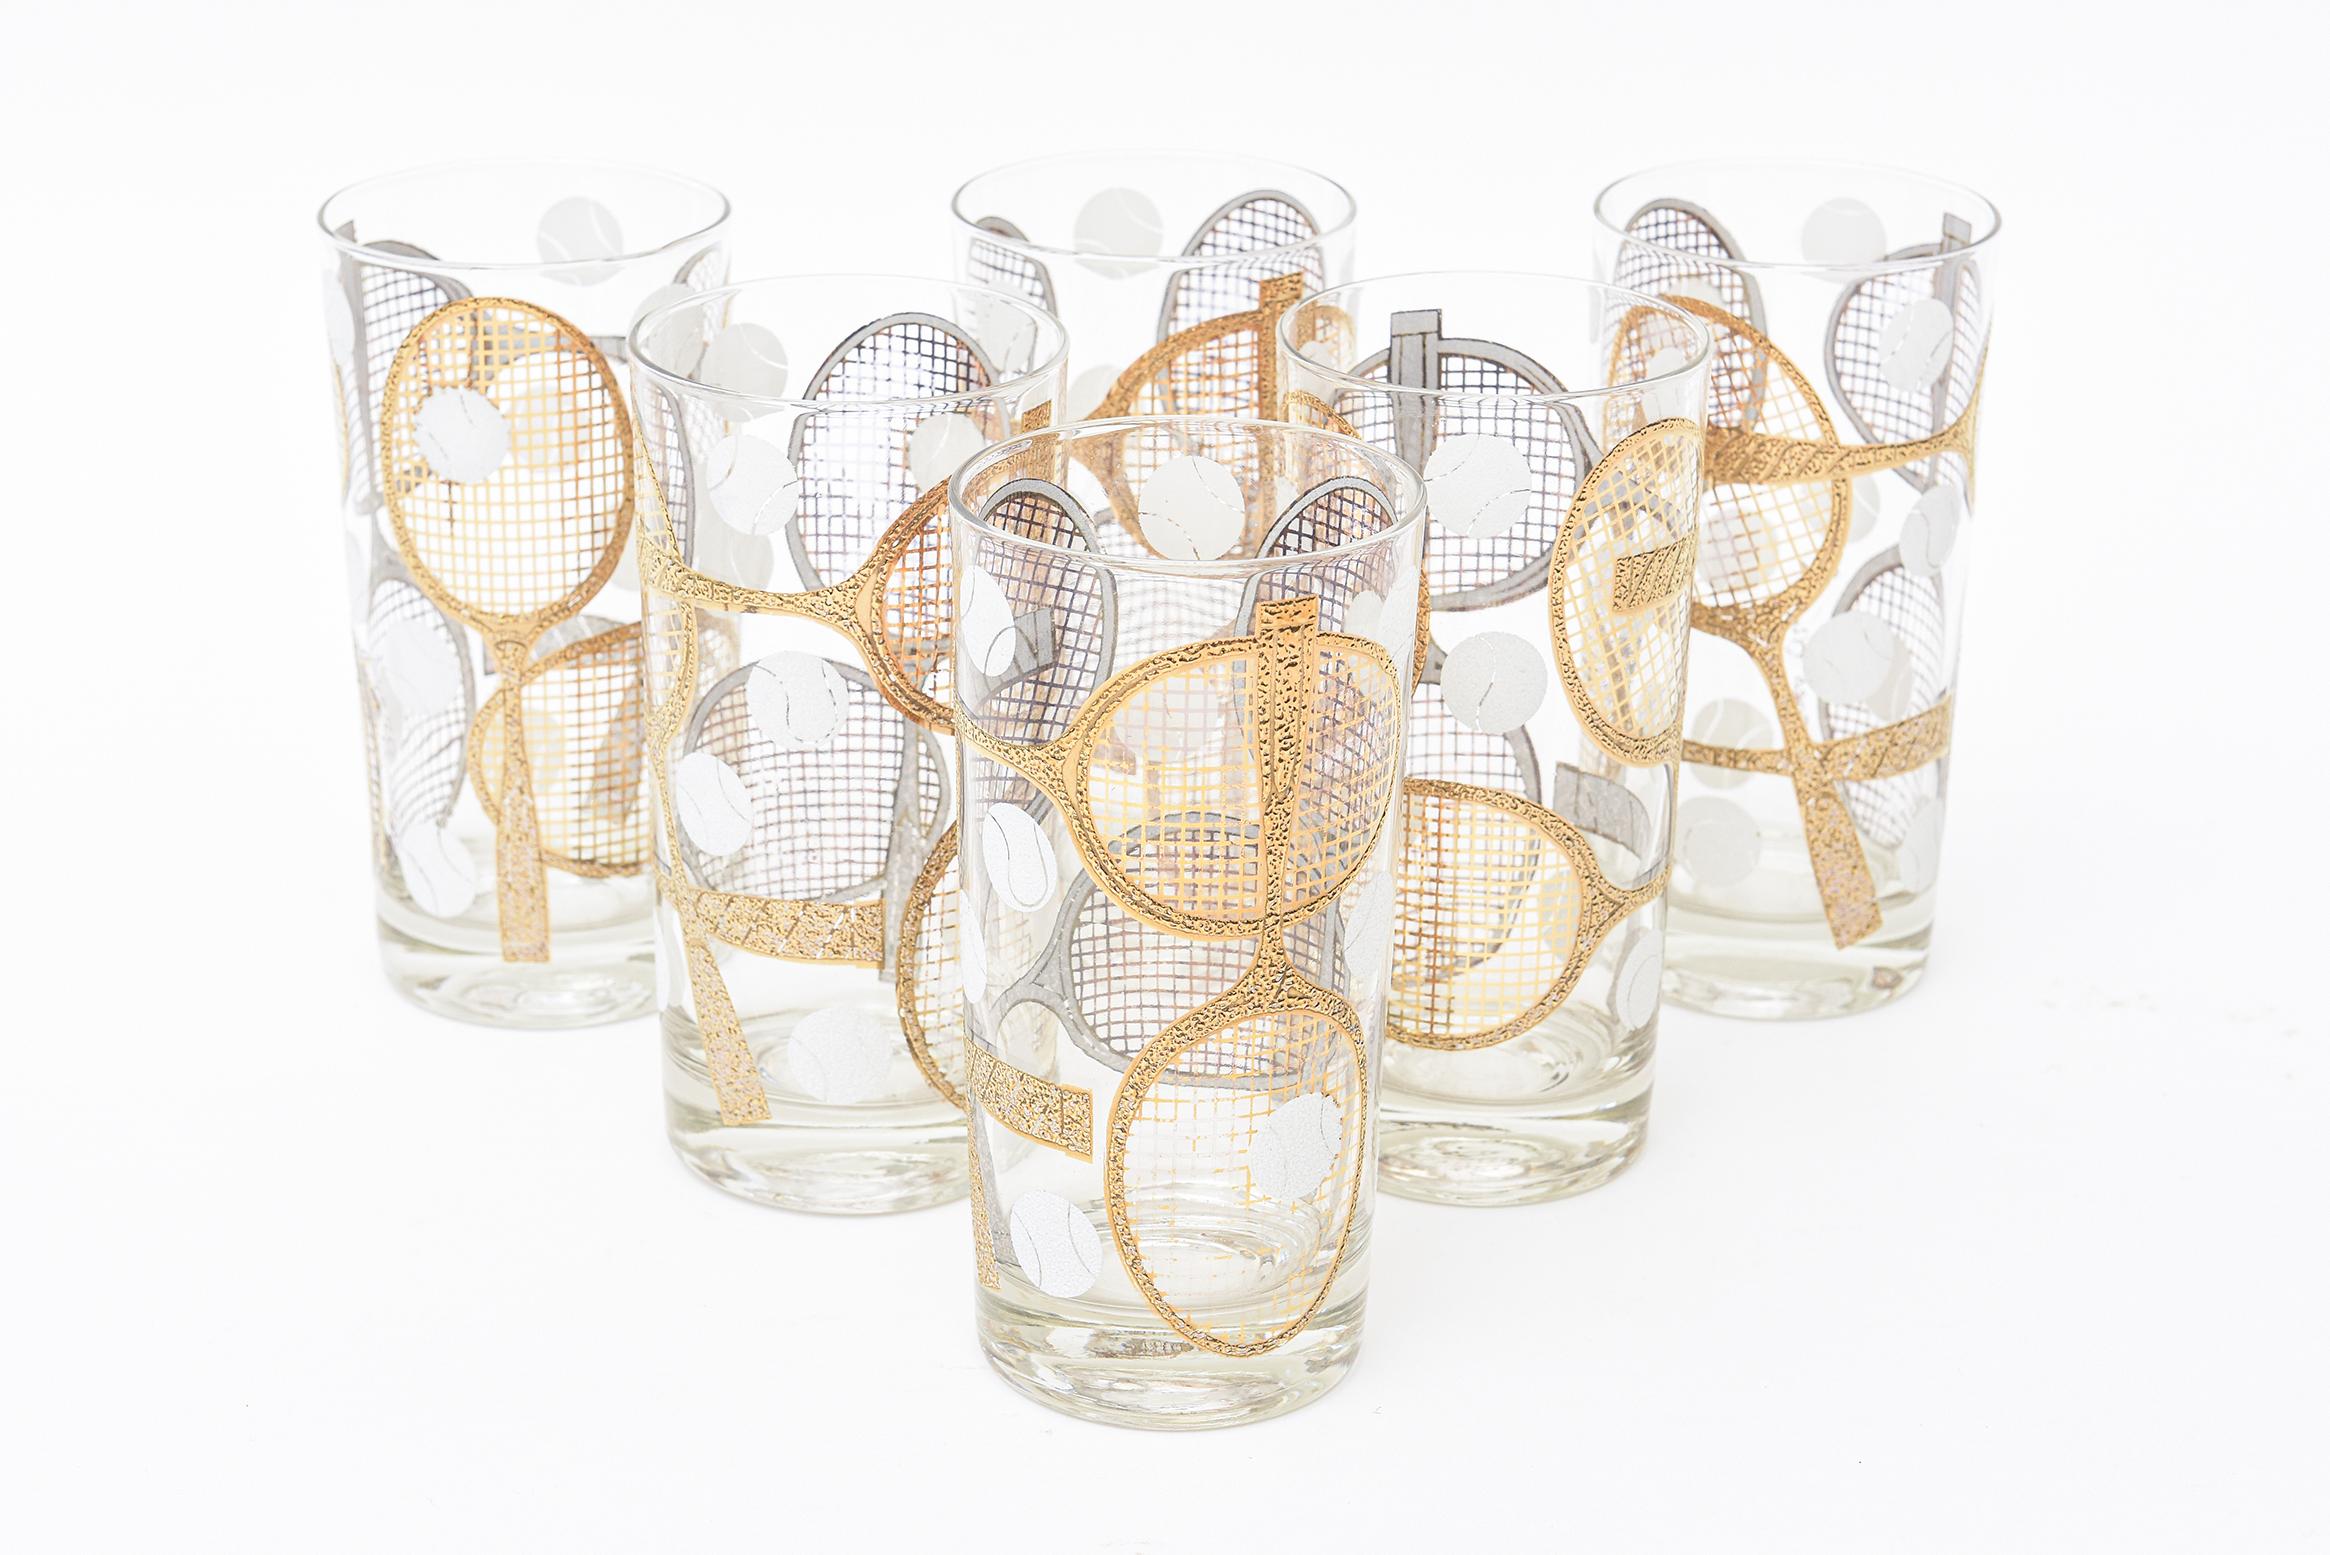 These fabulous signed set of 6 Georges Briard highballs or tall drinking glasses have the subject matter of gold applied dimensional tennis rackets and white painted tennis balls in random form. They have applied gold and silver paint. They are